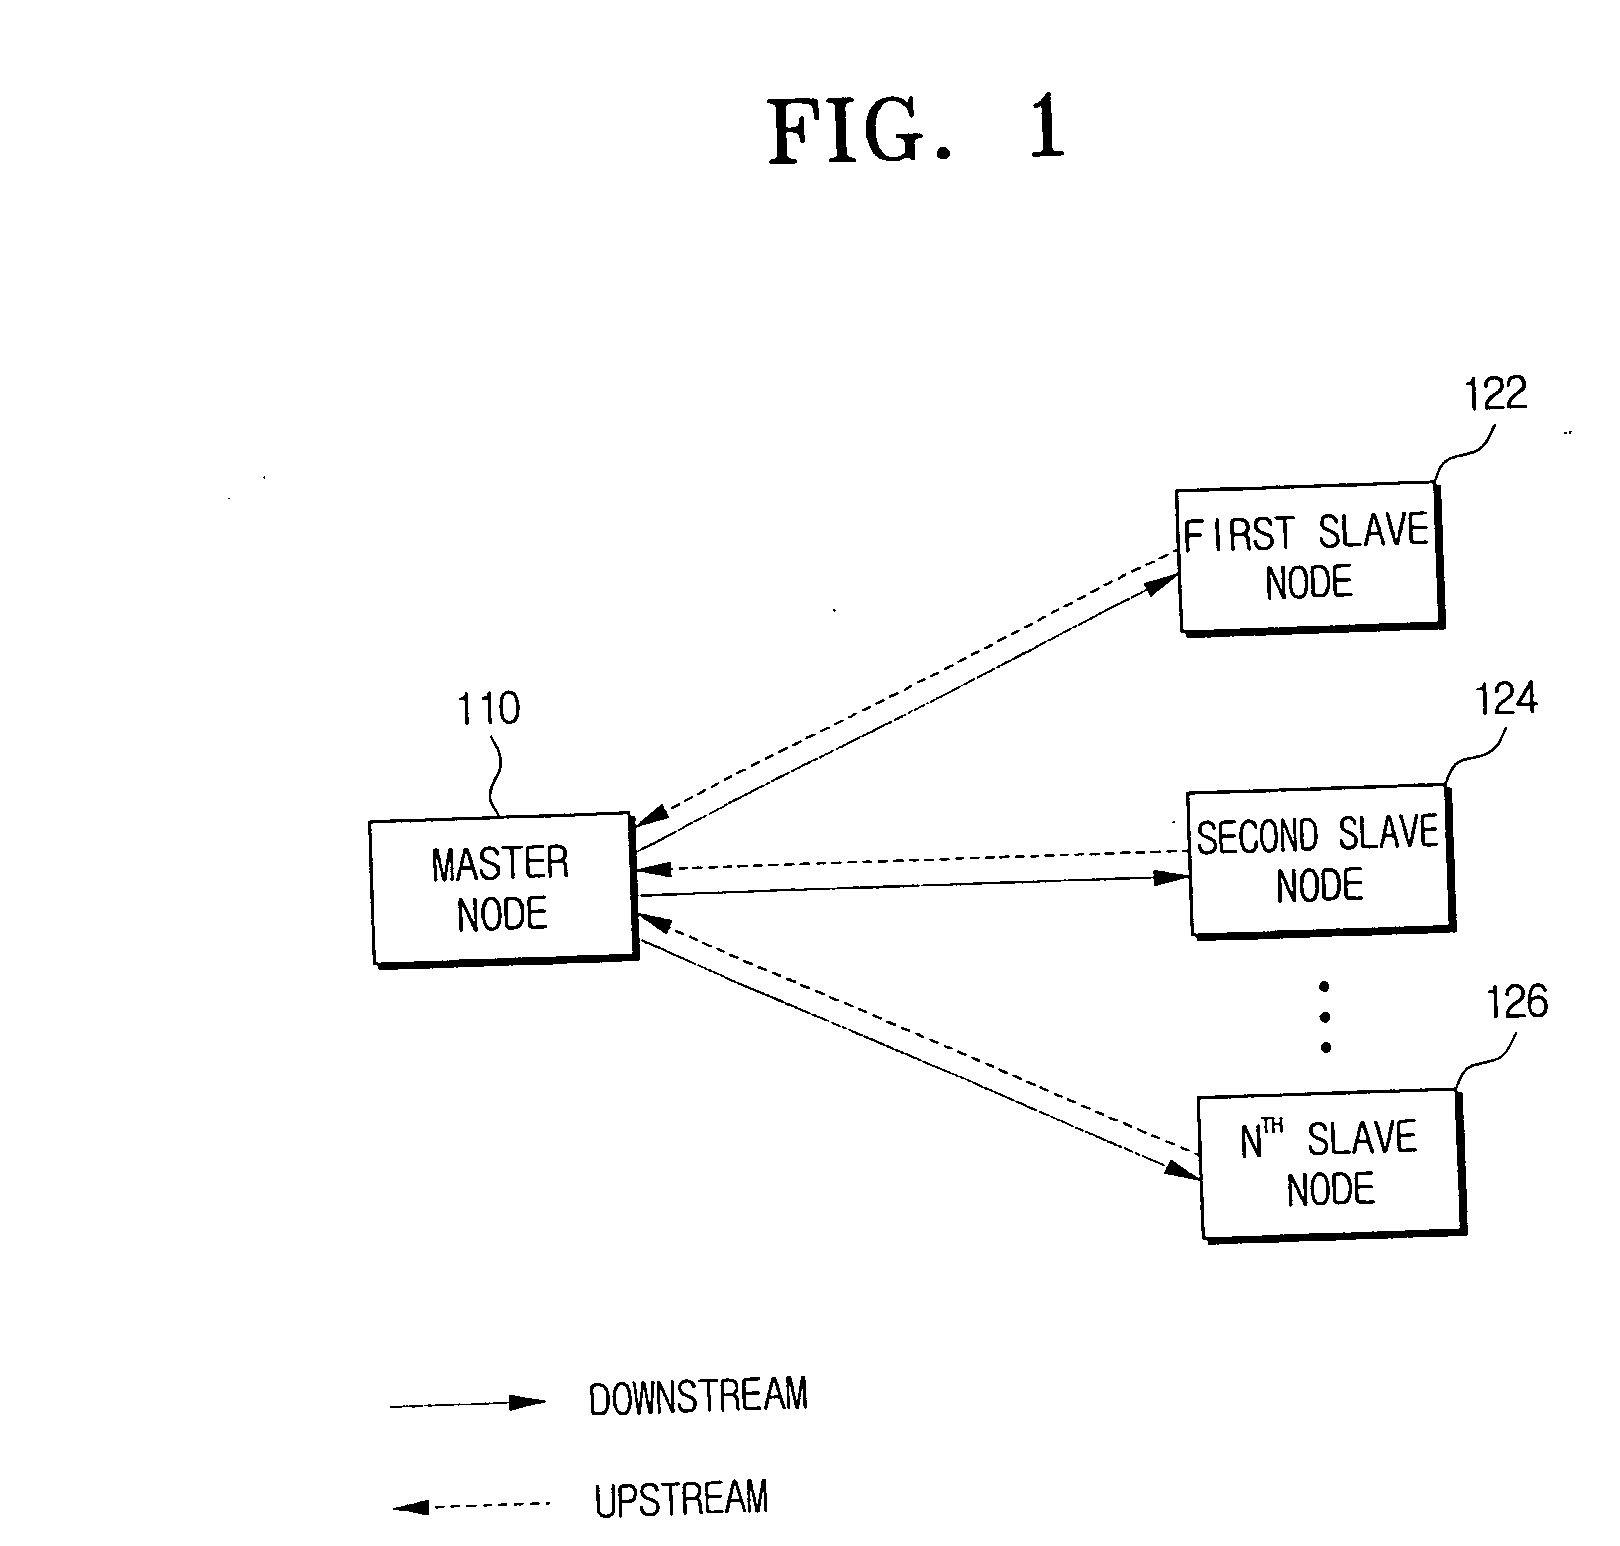 Time synchronizing method and apparatus based on time stamp